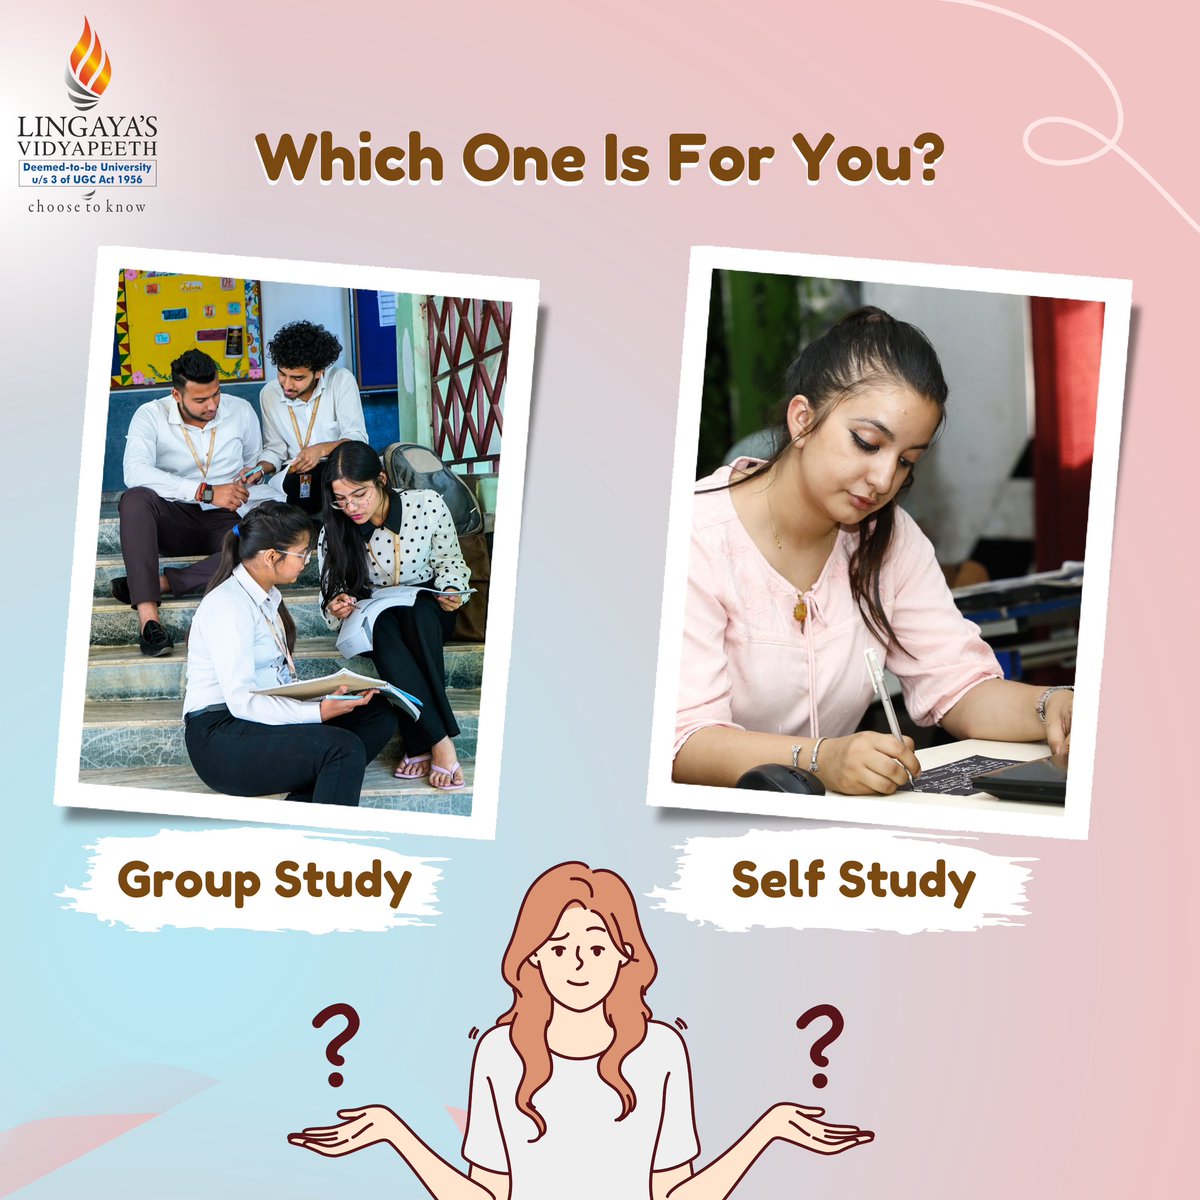 Comment which is beneficial for you - Group Study Or Self Study 

“Collaboration vs Concentration: The Benefits of Group Study and Self-Study'

#groupstudy #selfstudy #studymotivation #studygram #study #lvcampus #education #educationmatters #studenthacks #student